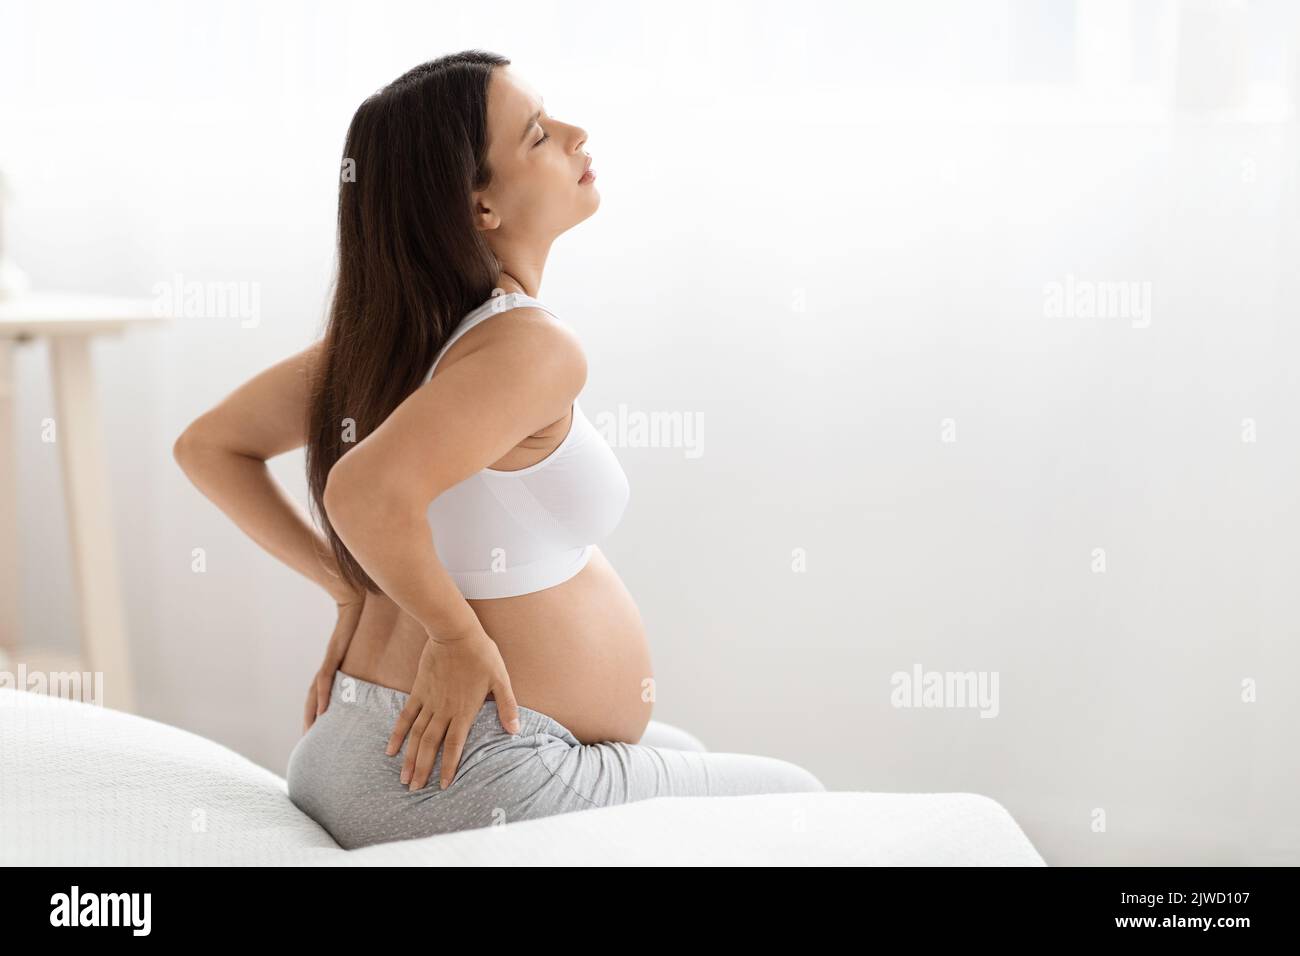 Pregnant woman having back pain, sitting on bed Stock Photo